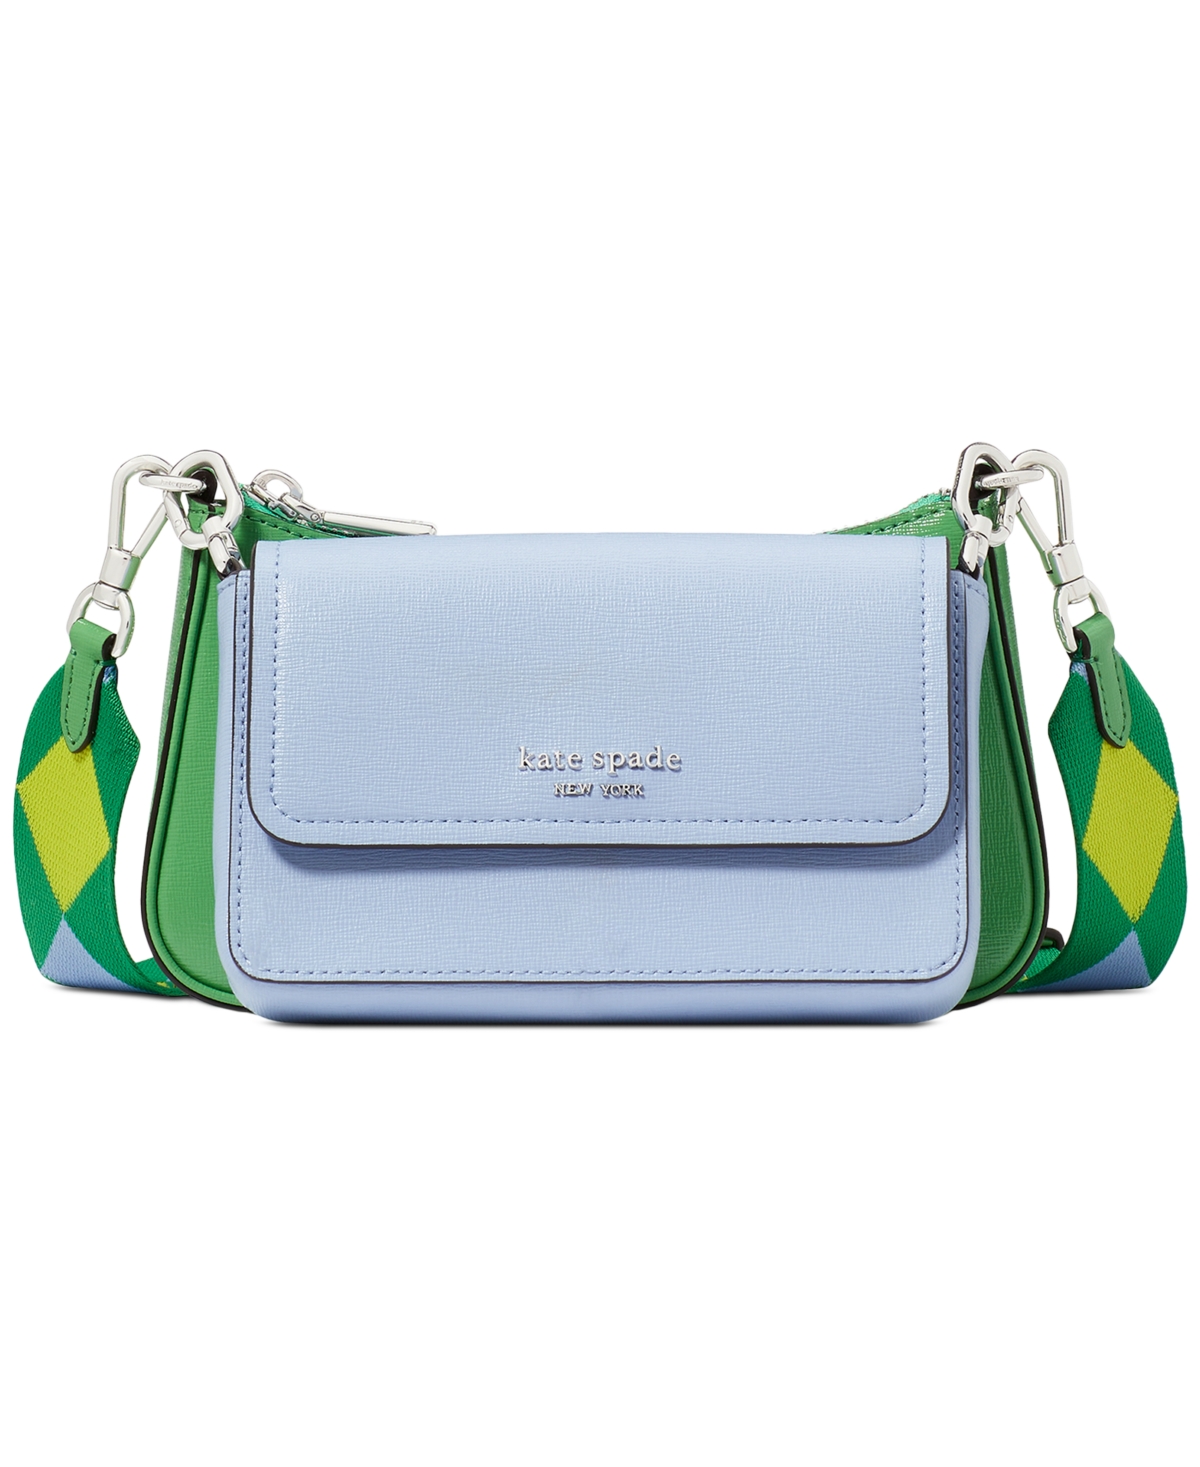 Double Up Colorblocked Saffiano Leather Crossbody - North Star Multi